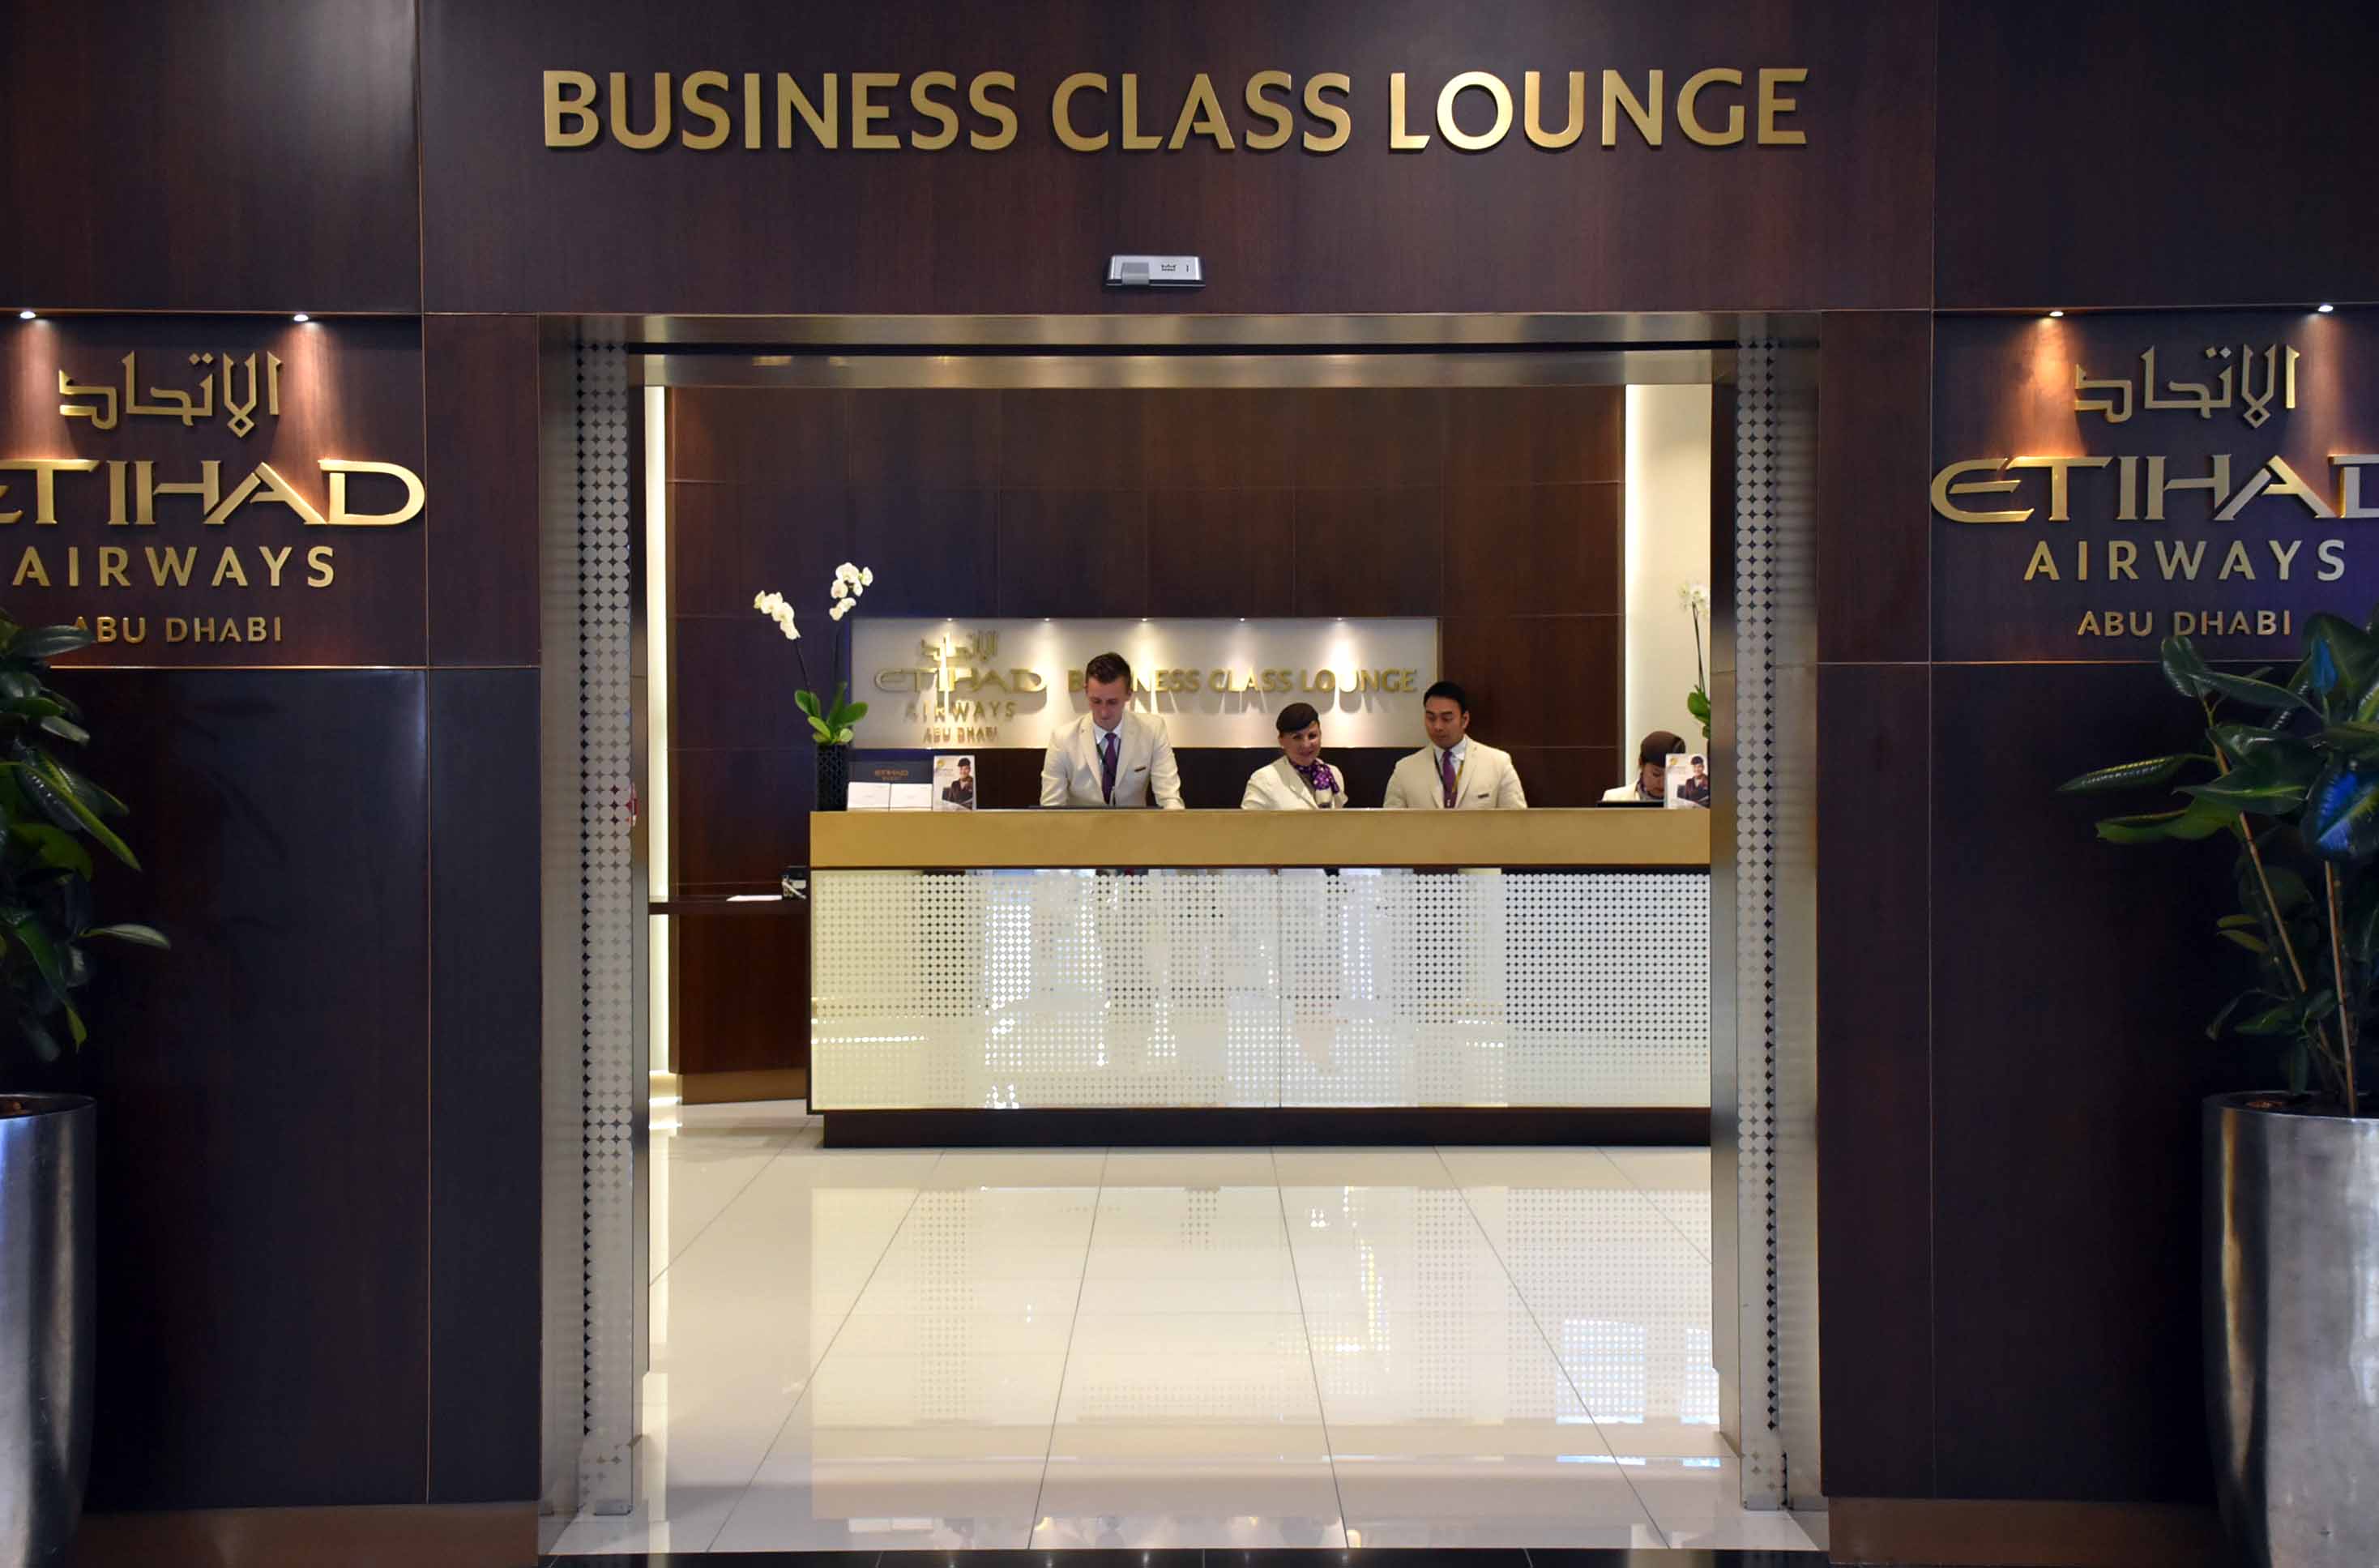 The Etihad Business Class Experience: World Class Lounge, Exquisite Food and an Airline Experience to Remember